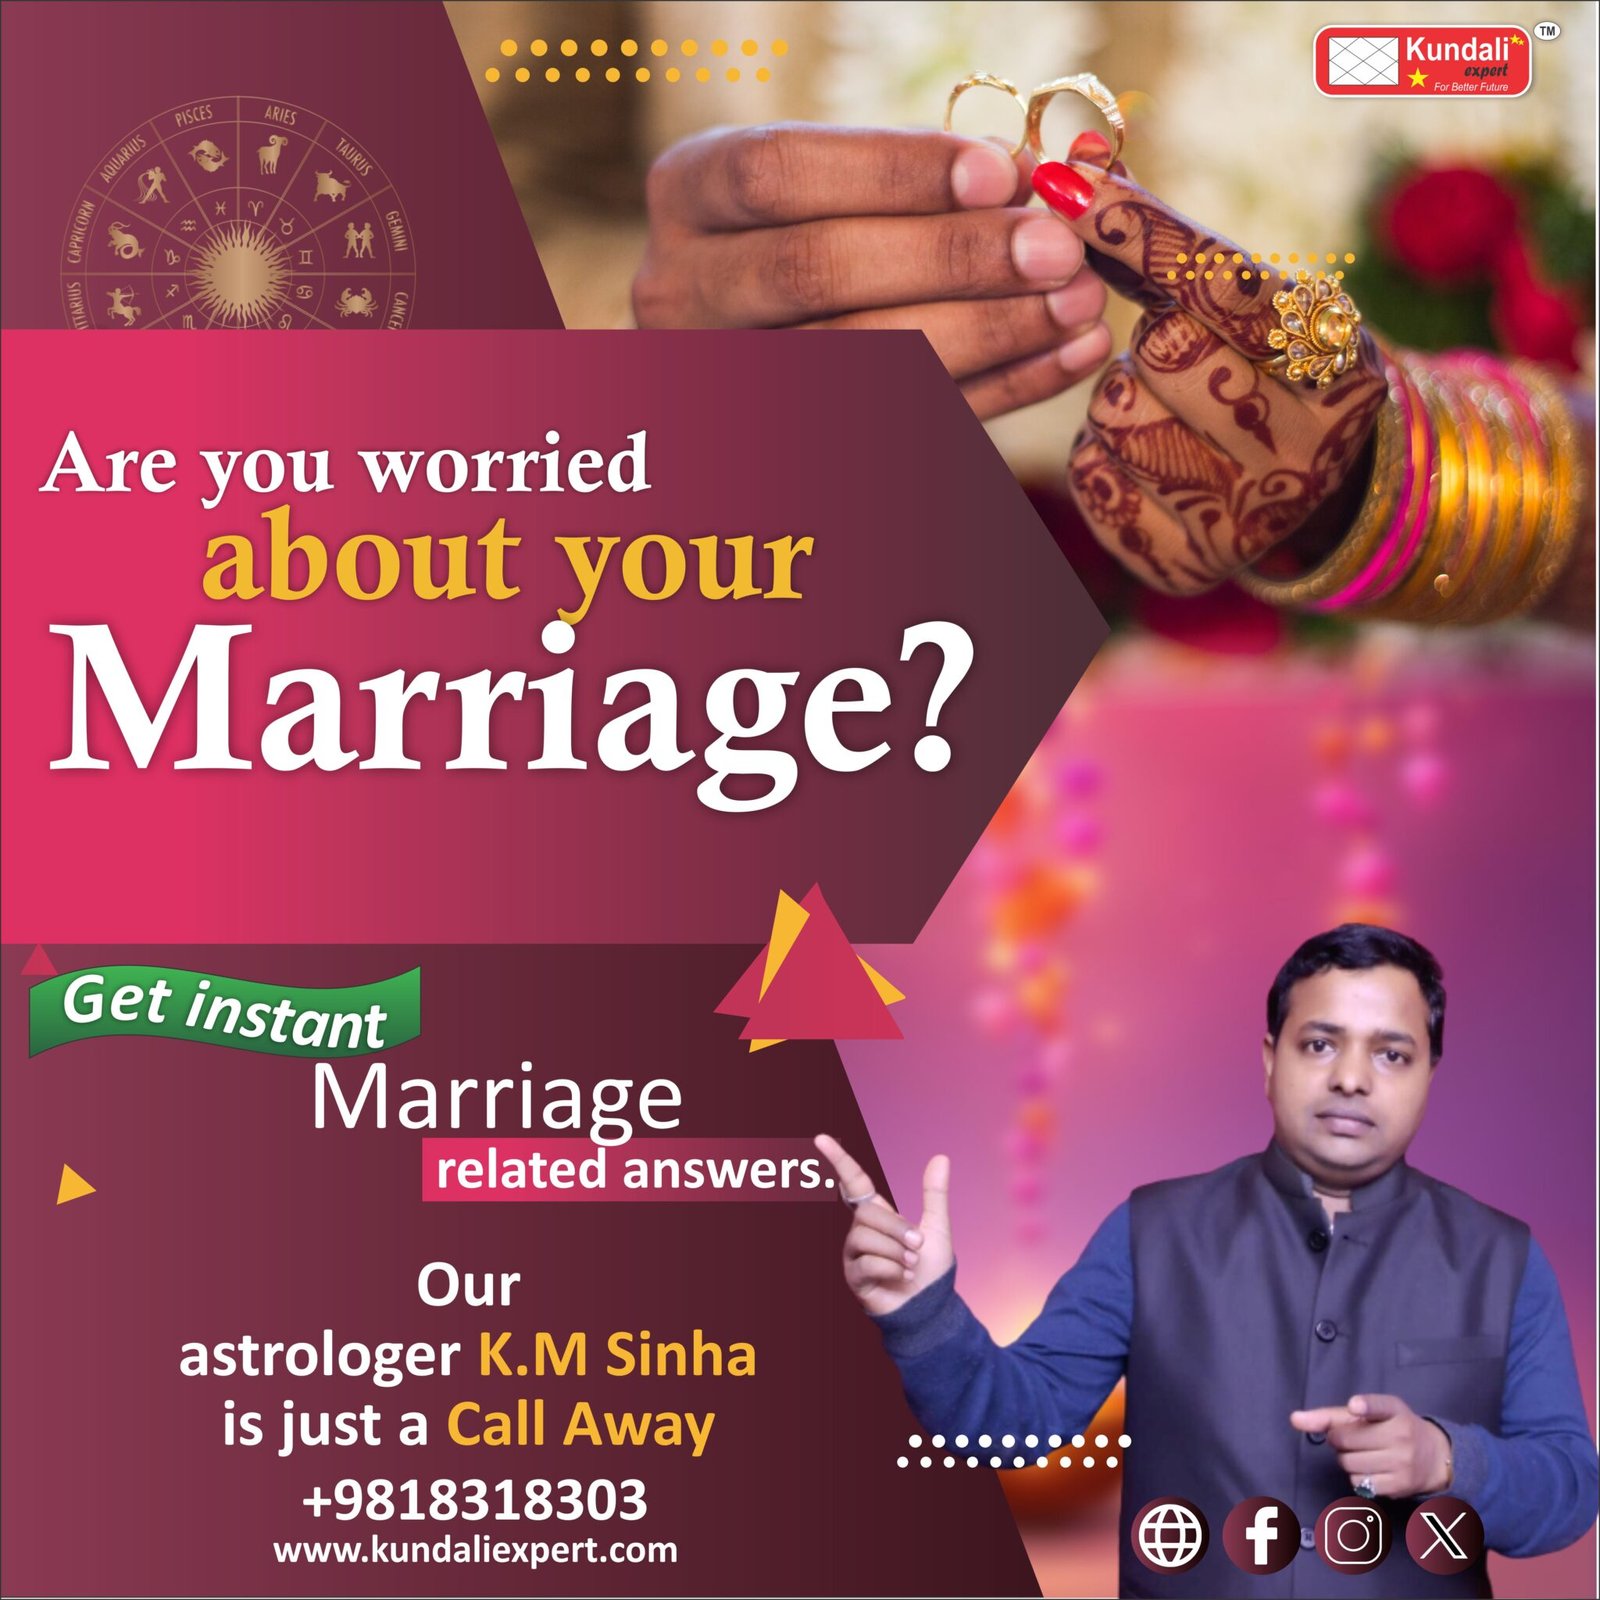 Are you worried about your marriage?